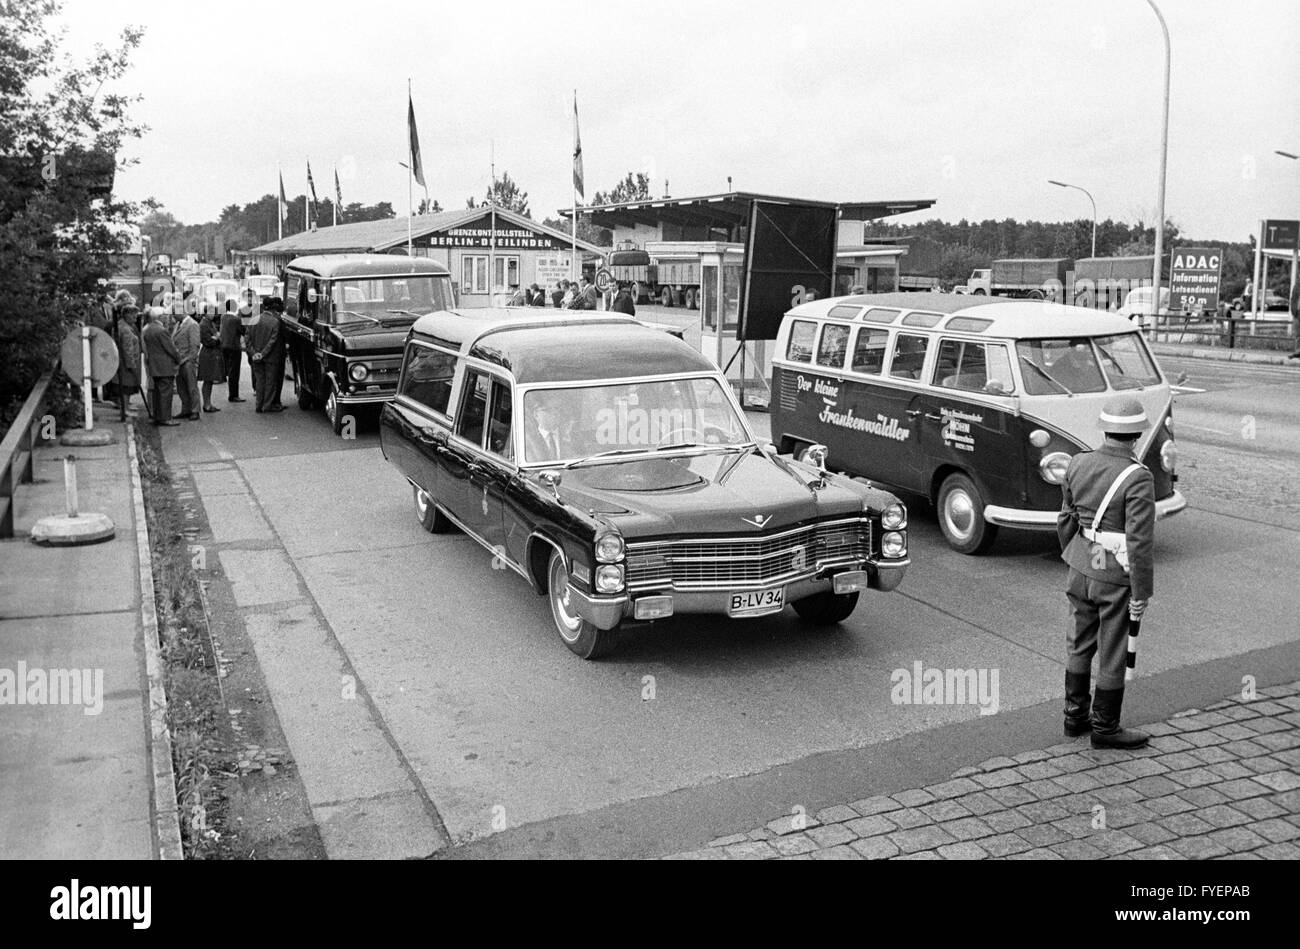 In a convoy of 120 cars the mortal remains of student Benno Ohnesorg, who was shot on 02 June 1967, are taken from Berlin to Hannover on 08 June 1967. Students had negotiated a renouncement of controls and tolls while crossing the GDR on behalf of GDR authorities. Stock Photo